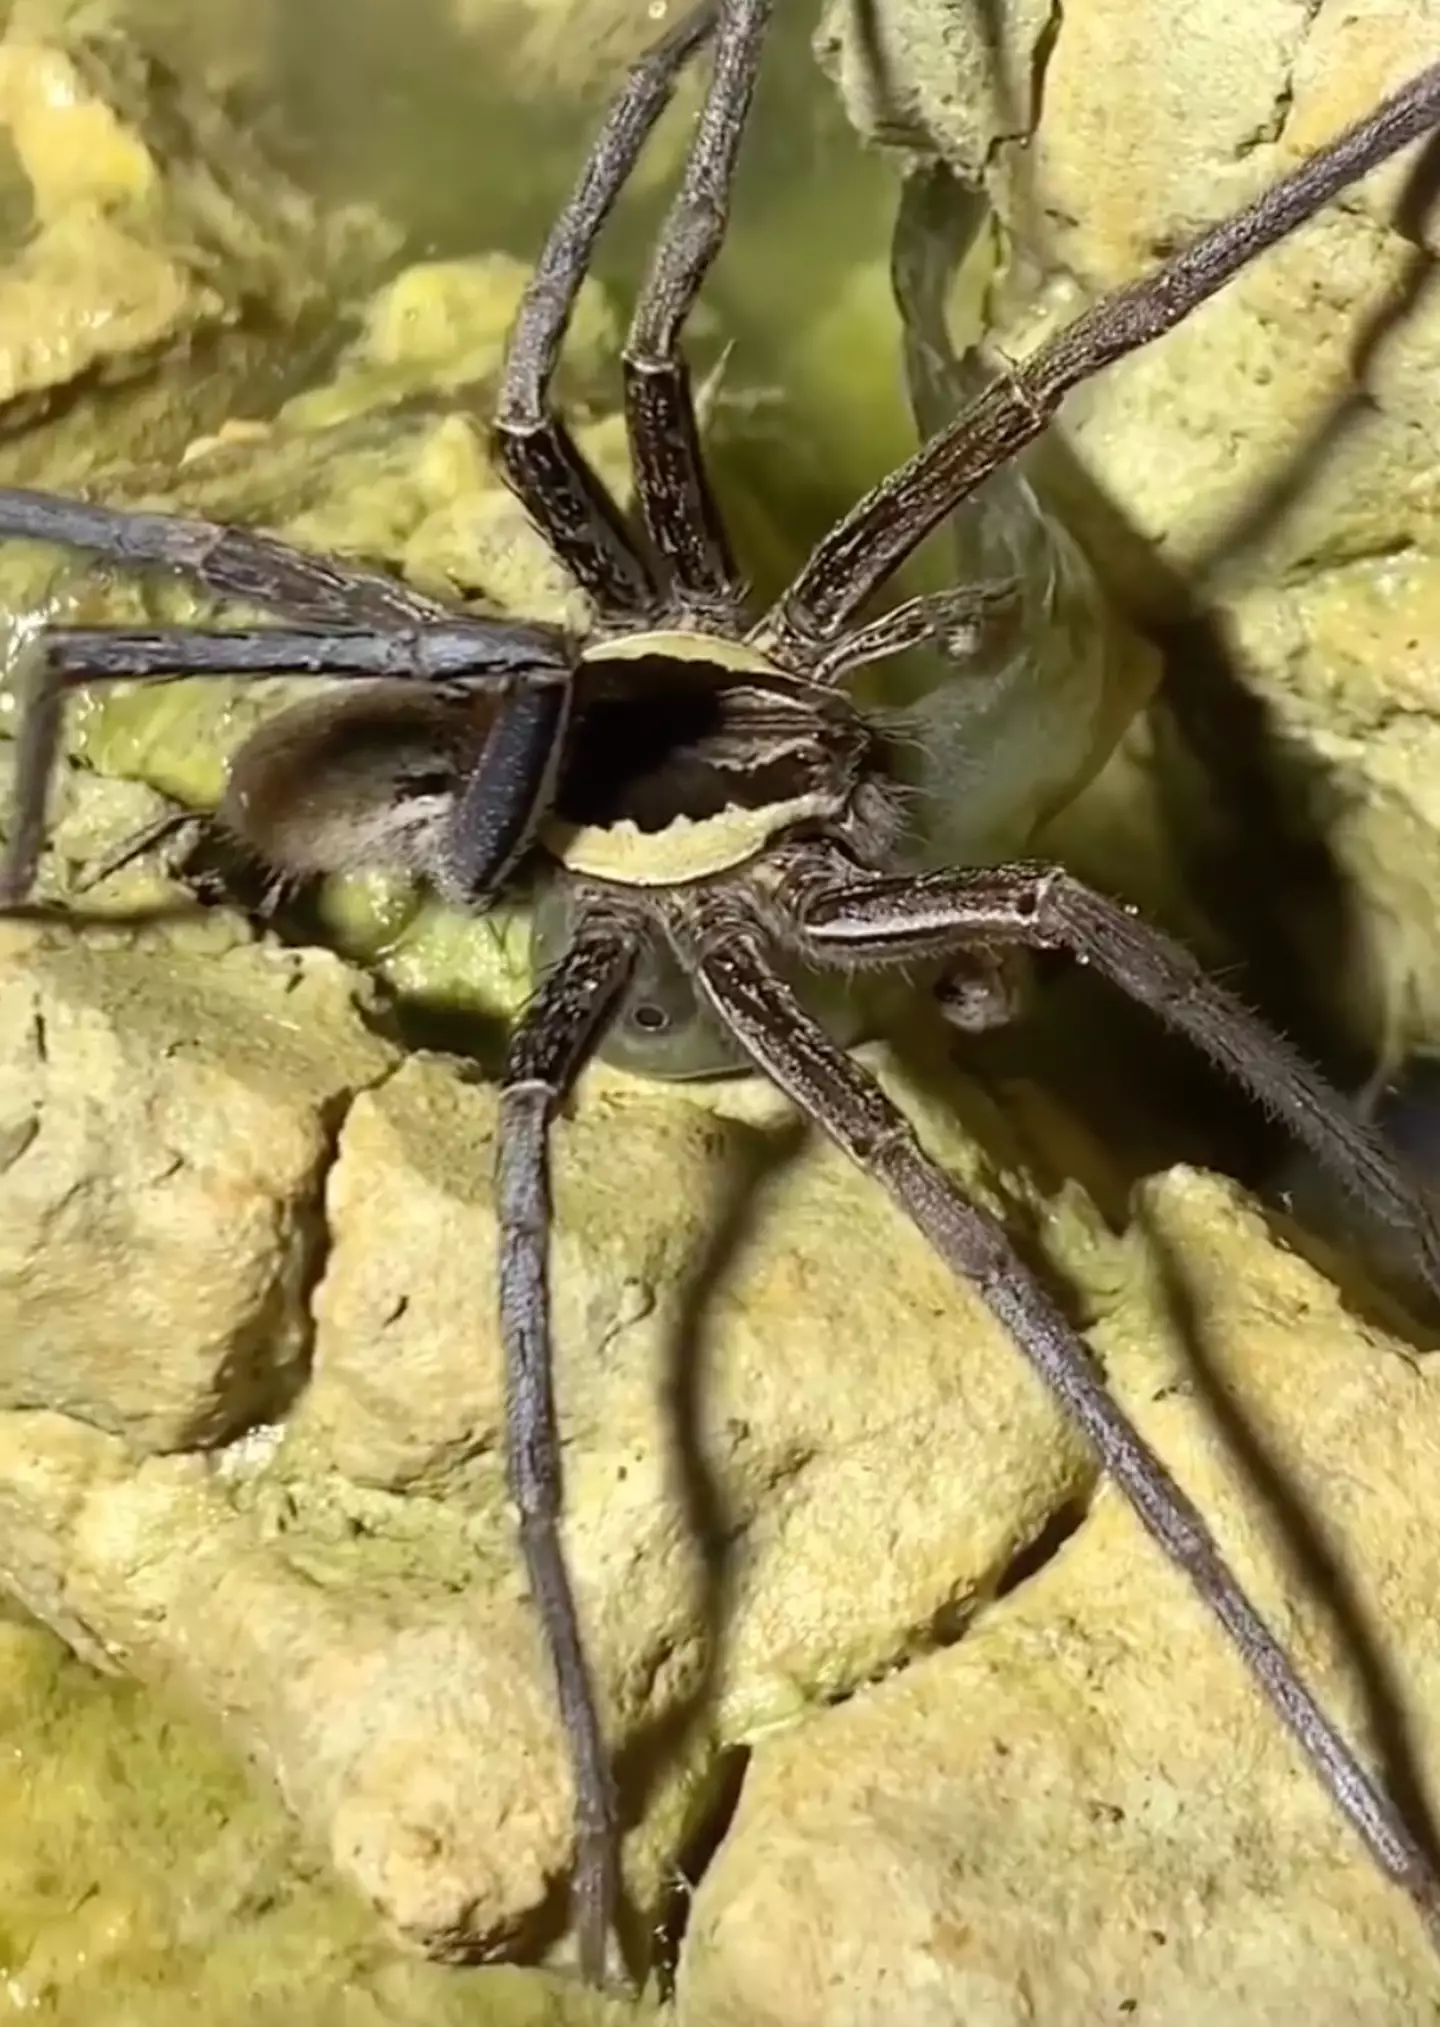 The fishing spider was caught devouring its prey.